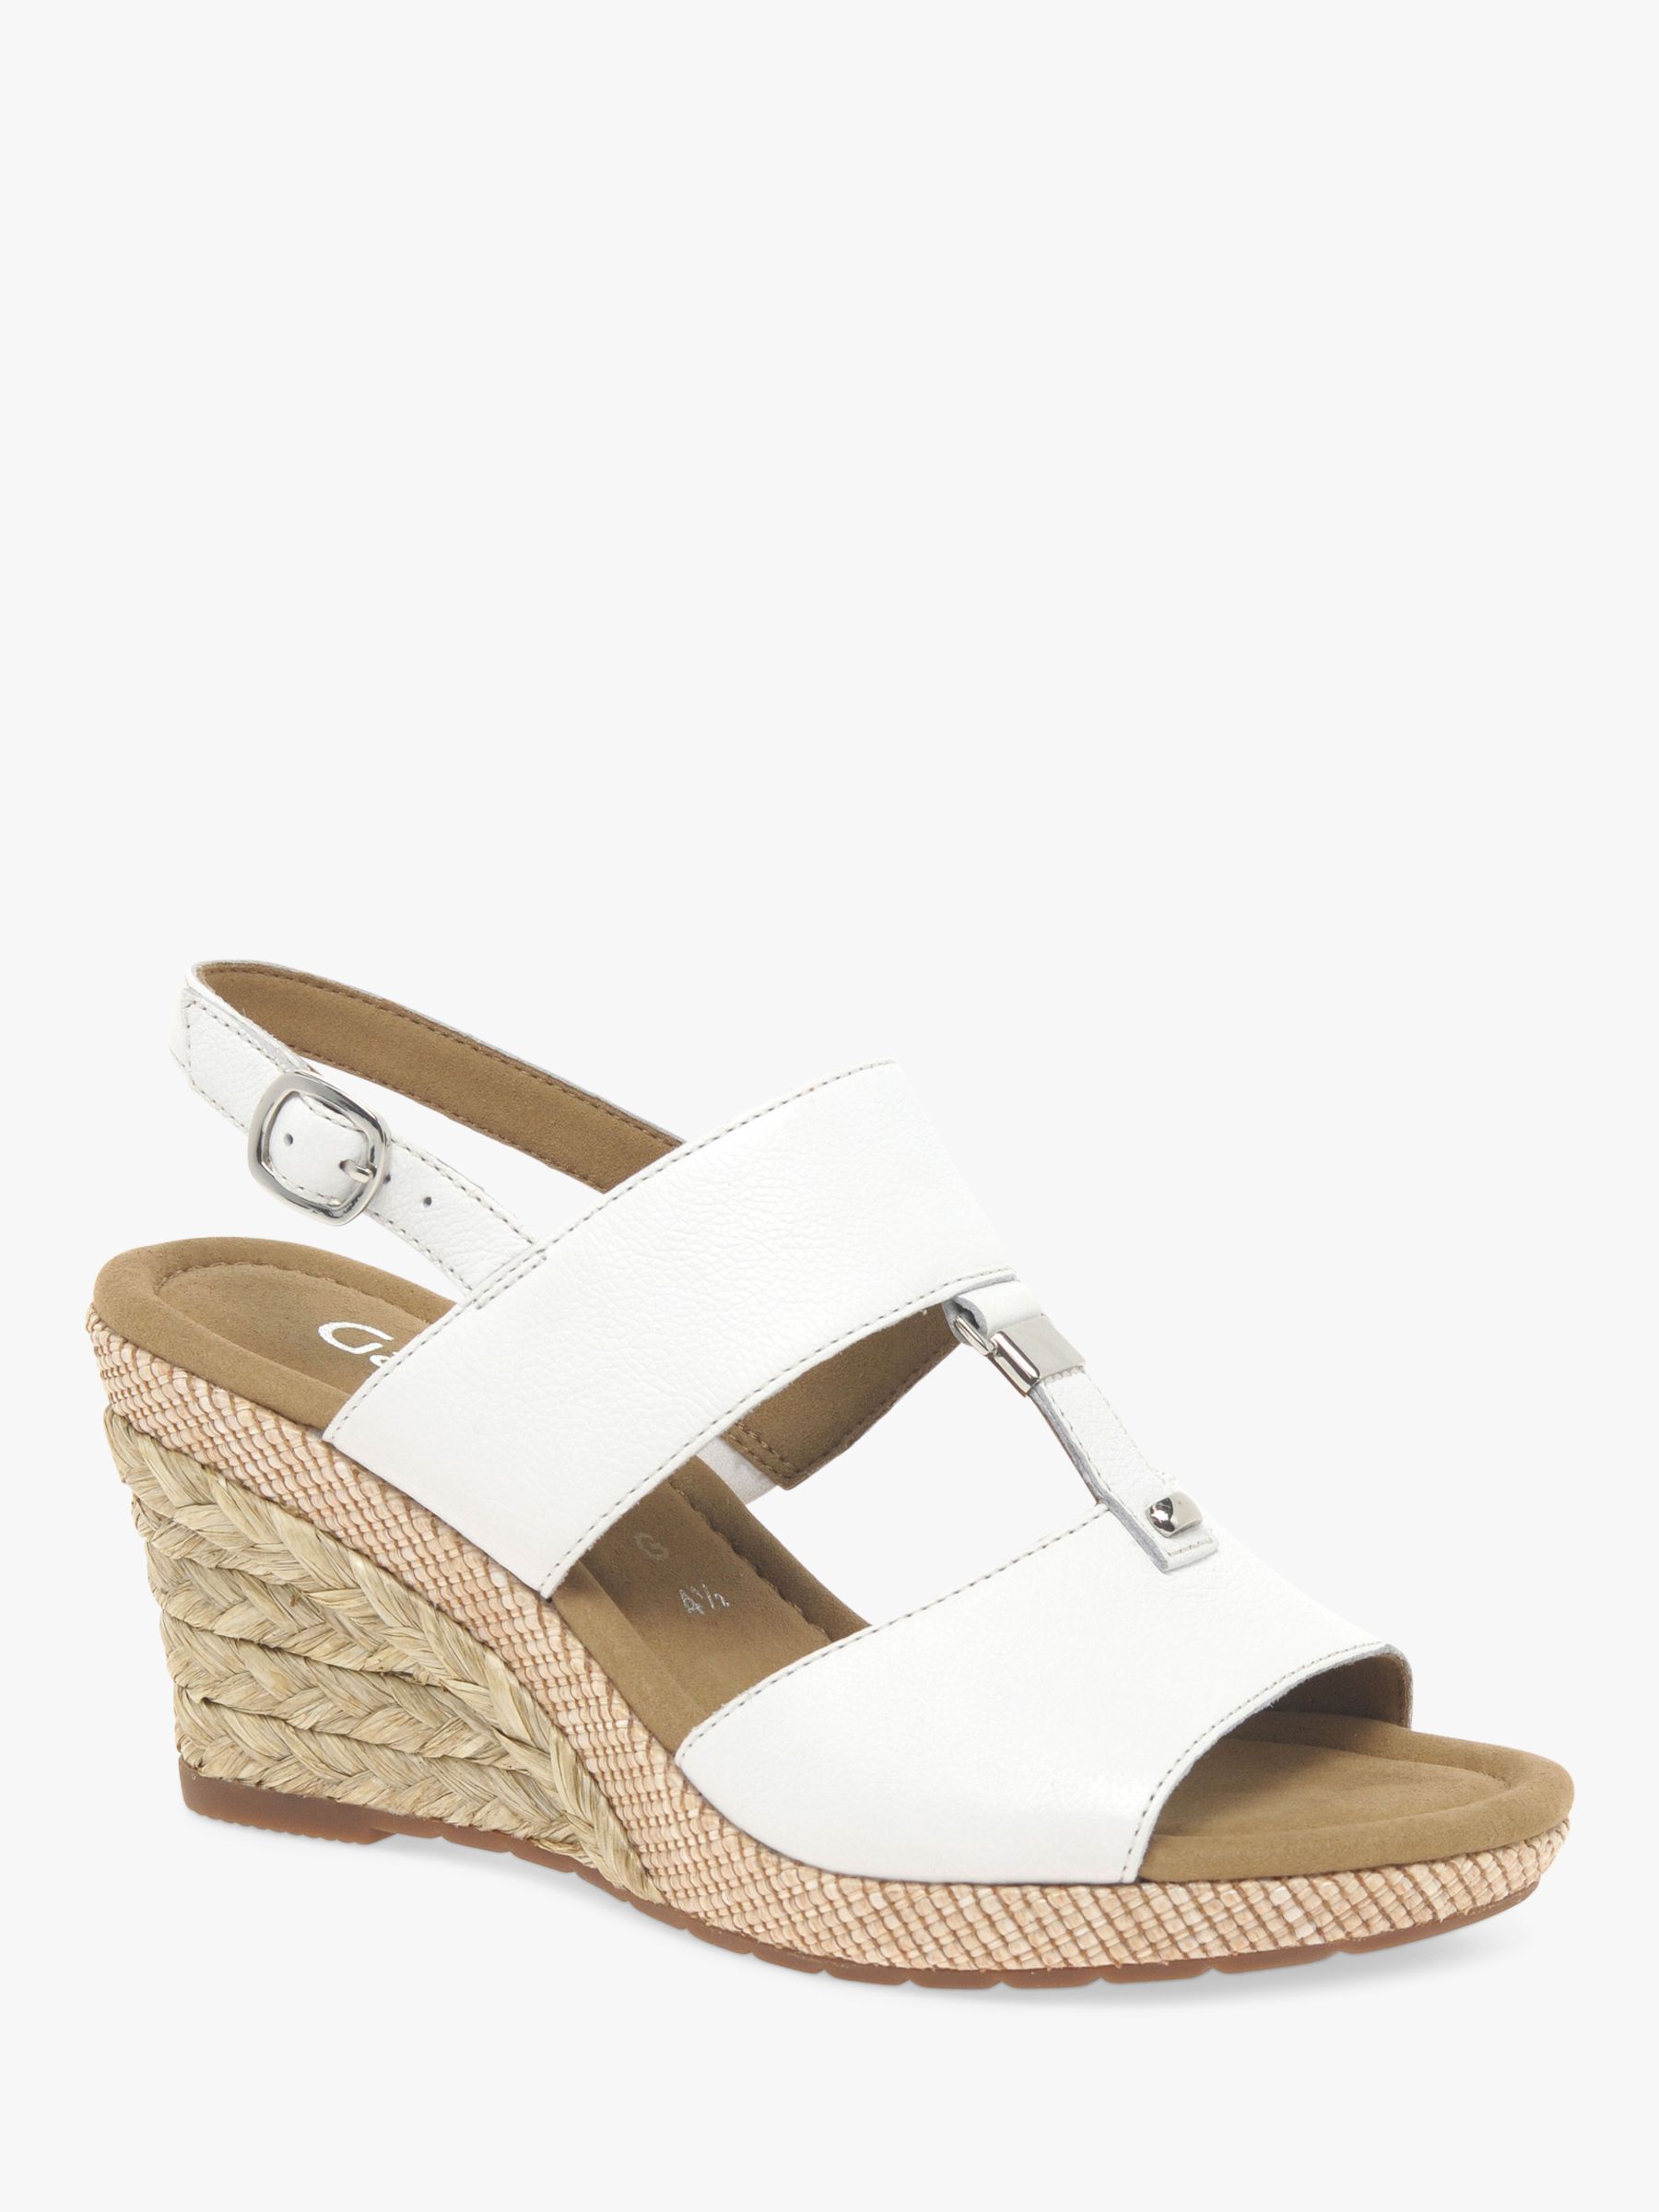 Gabor Keira Wide Fit Wedge Sandals, White Leather, 6